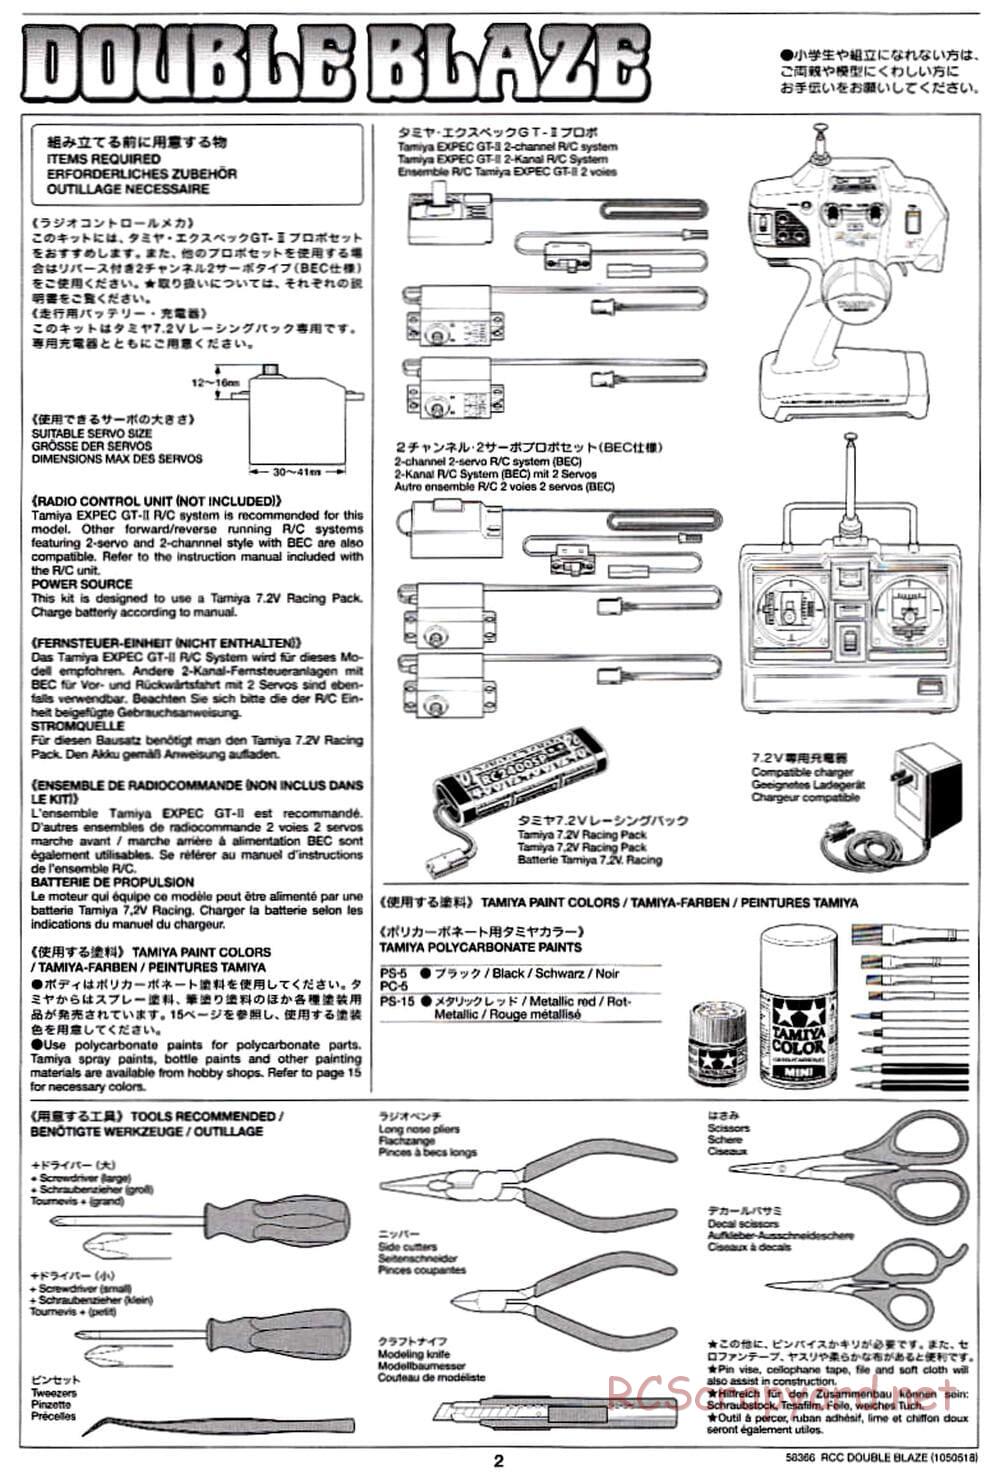 Tamiya - Double Blaze - WR-01 Chassis - Manual - Page 2